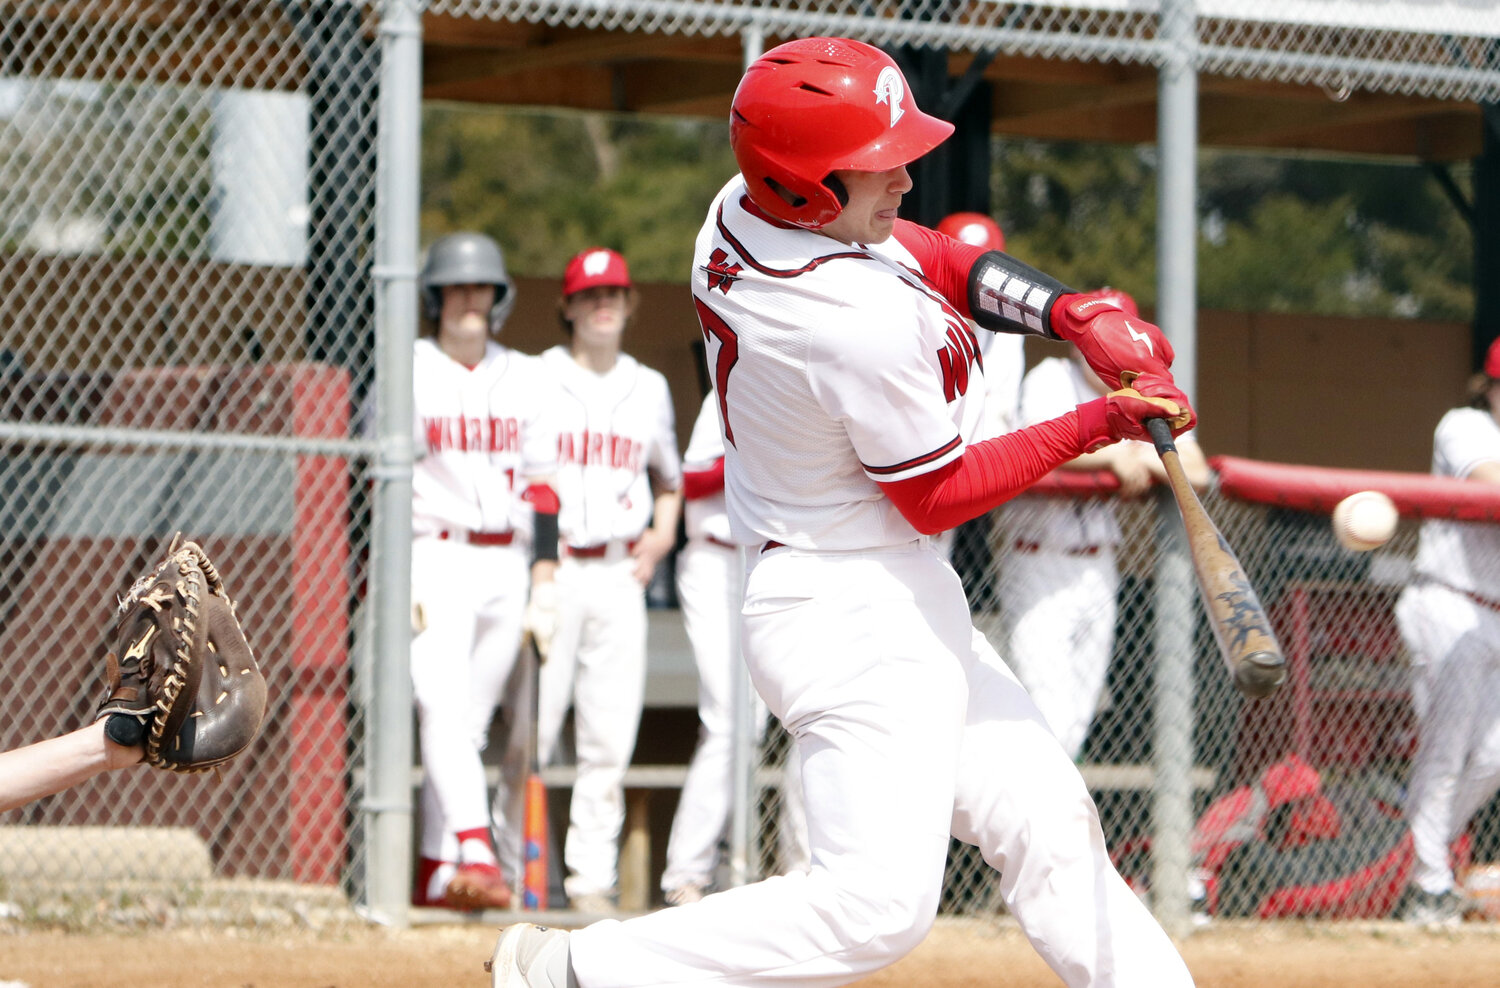 Austin Haas swings at a pitch during a game against Winfield earlier this season.